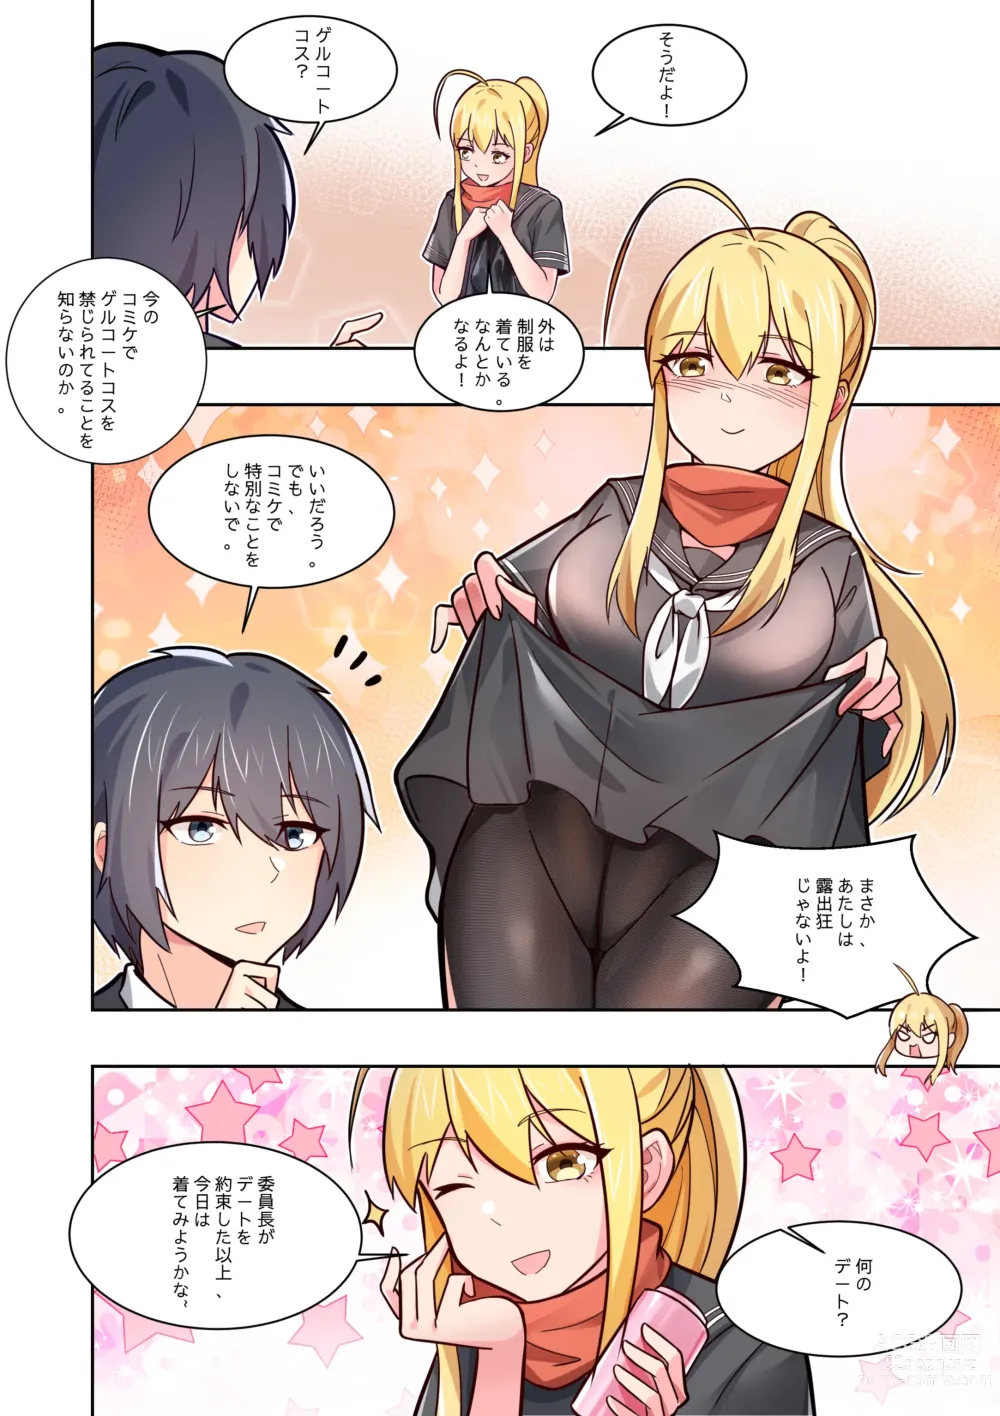 Page 40 of doujinshi ノーパン彼女